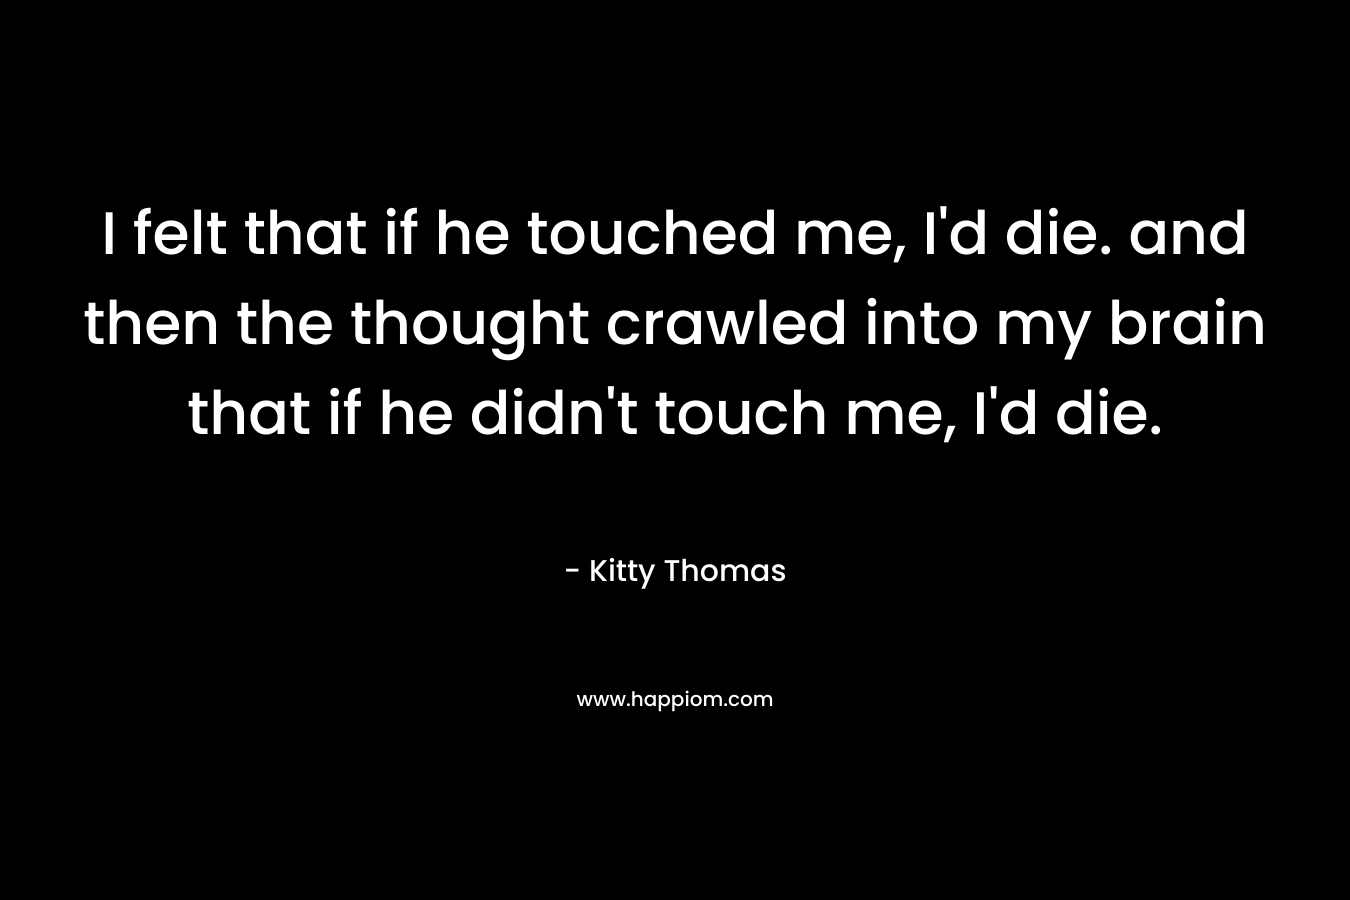 I felt that if he touched me, I'd die. and then the thought crawled into my brain that if he didn't touch me, I'd die.